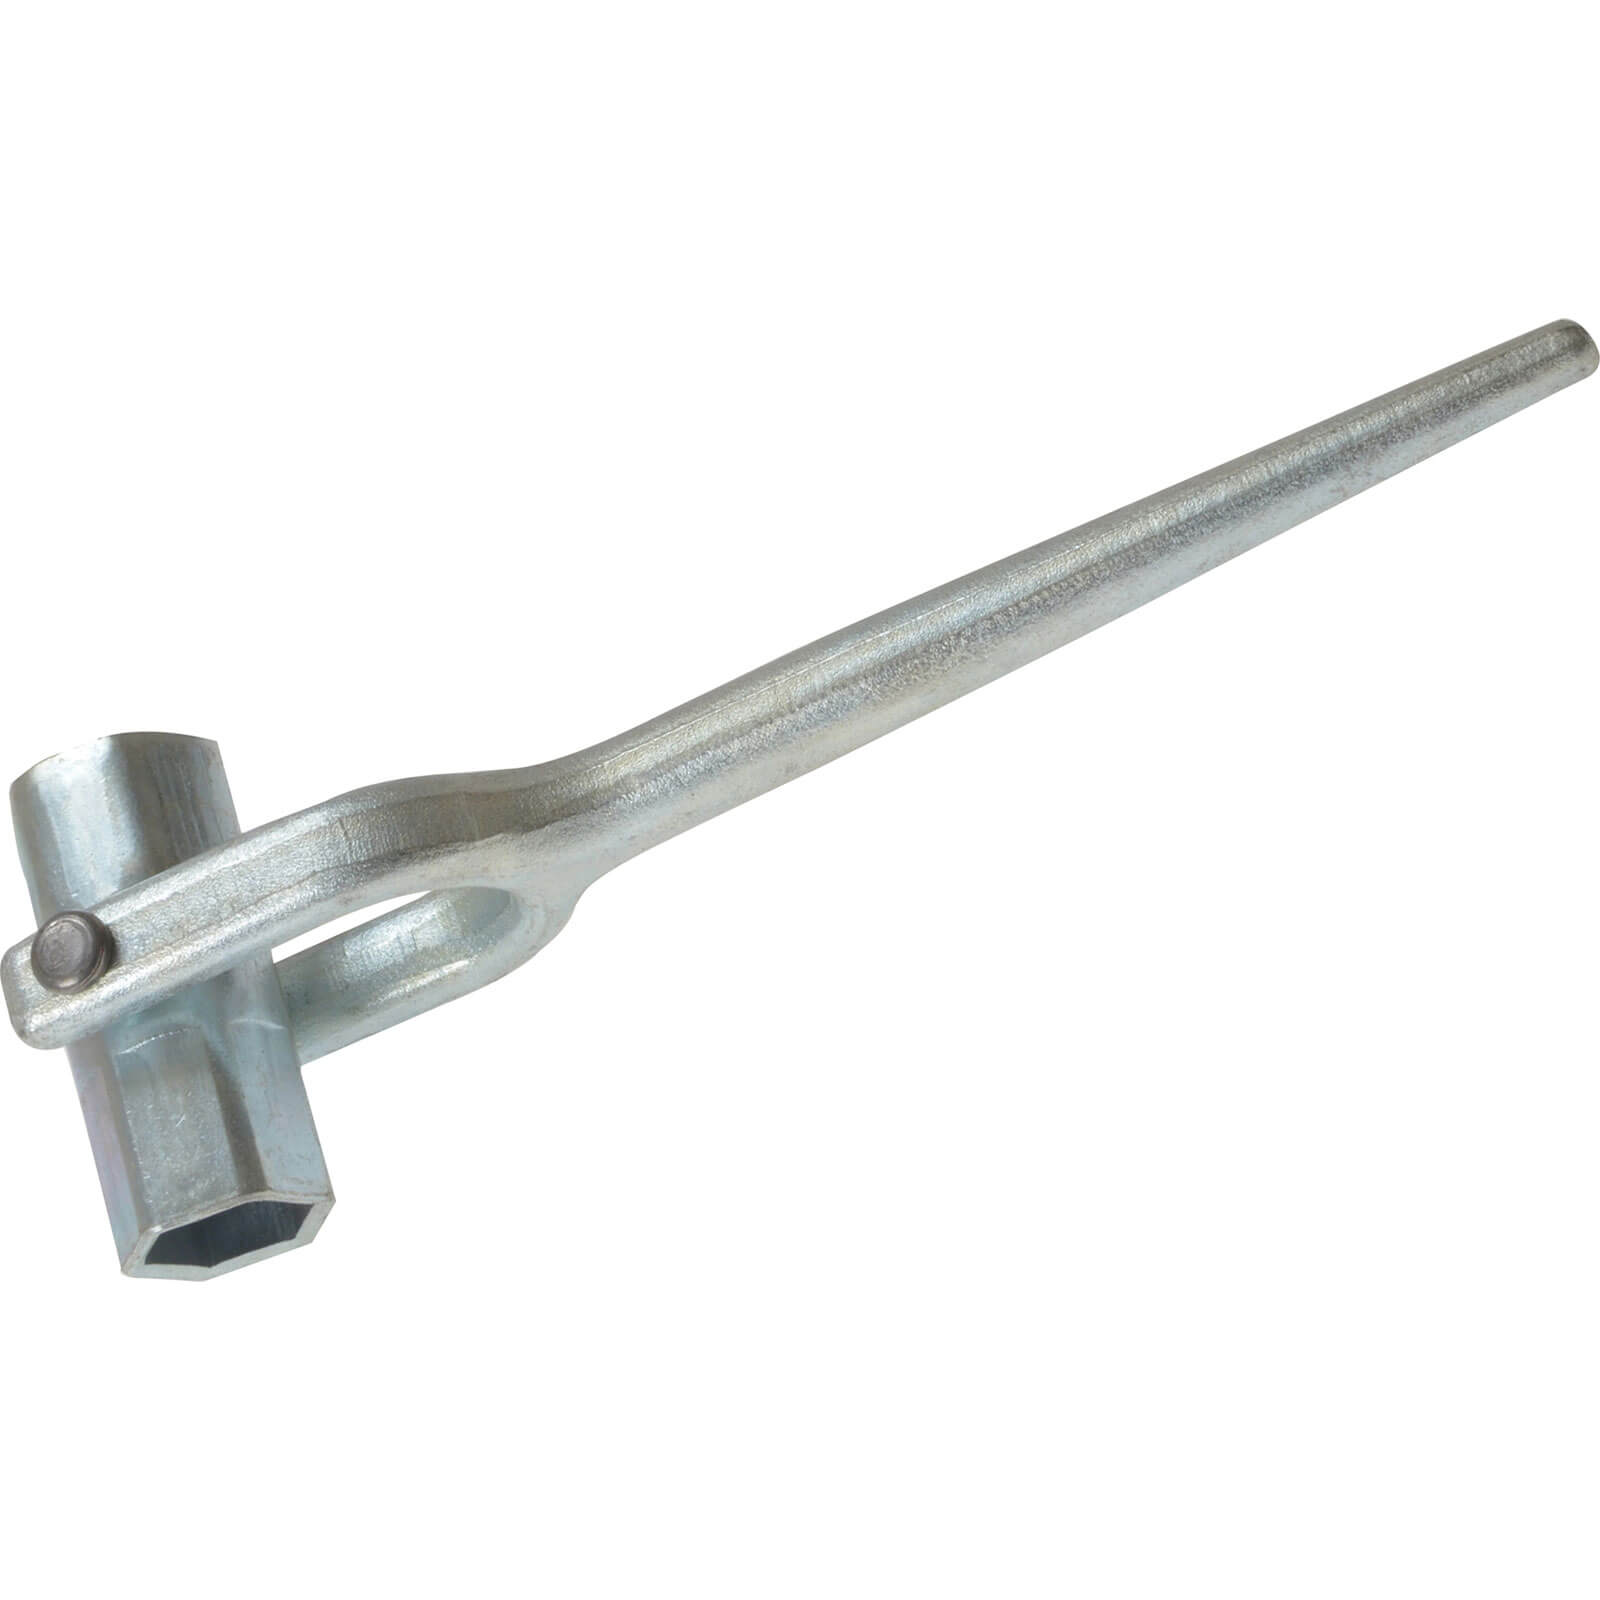 Image of Priory 325 Double Ended Scaffold Spanner Whit 7/16" x 1/2" Round Steel Socket